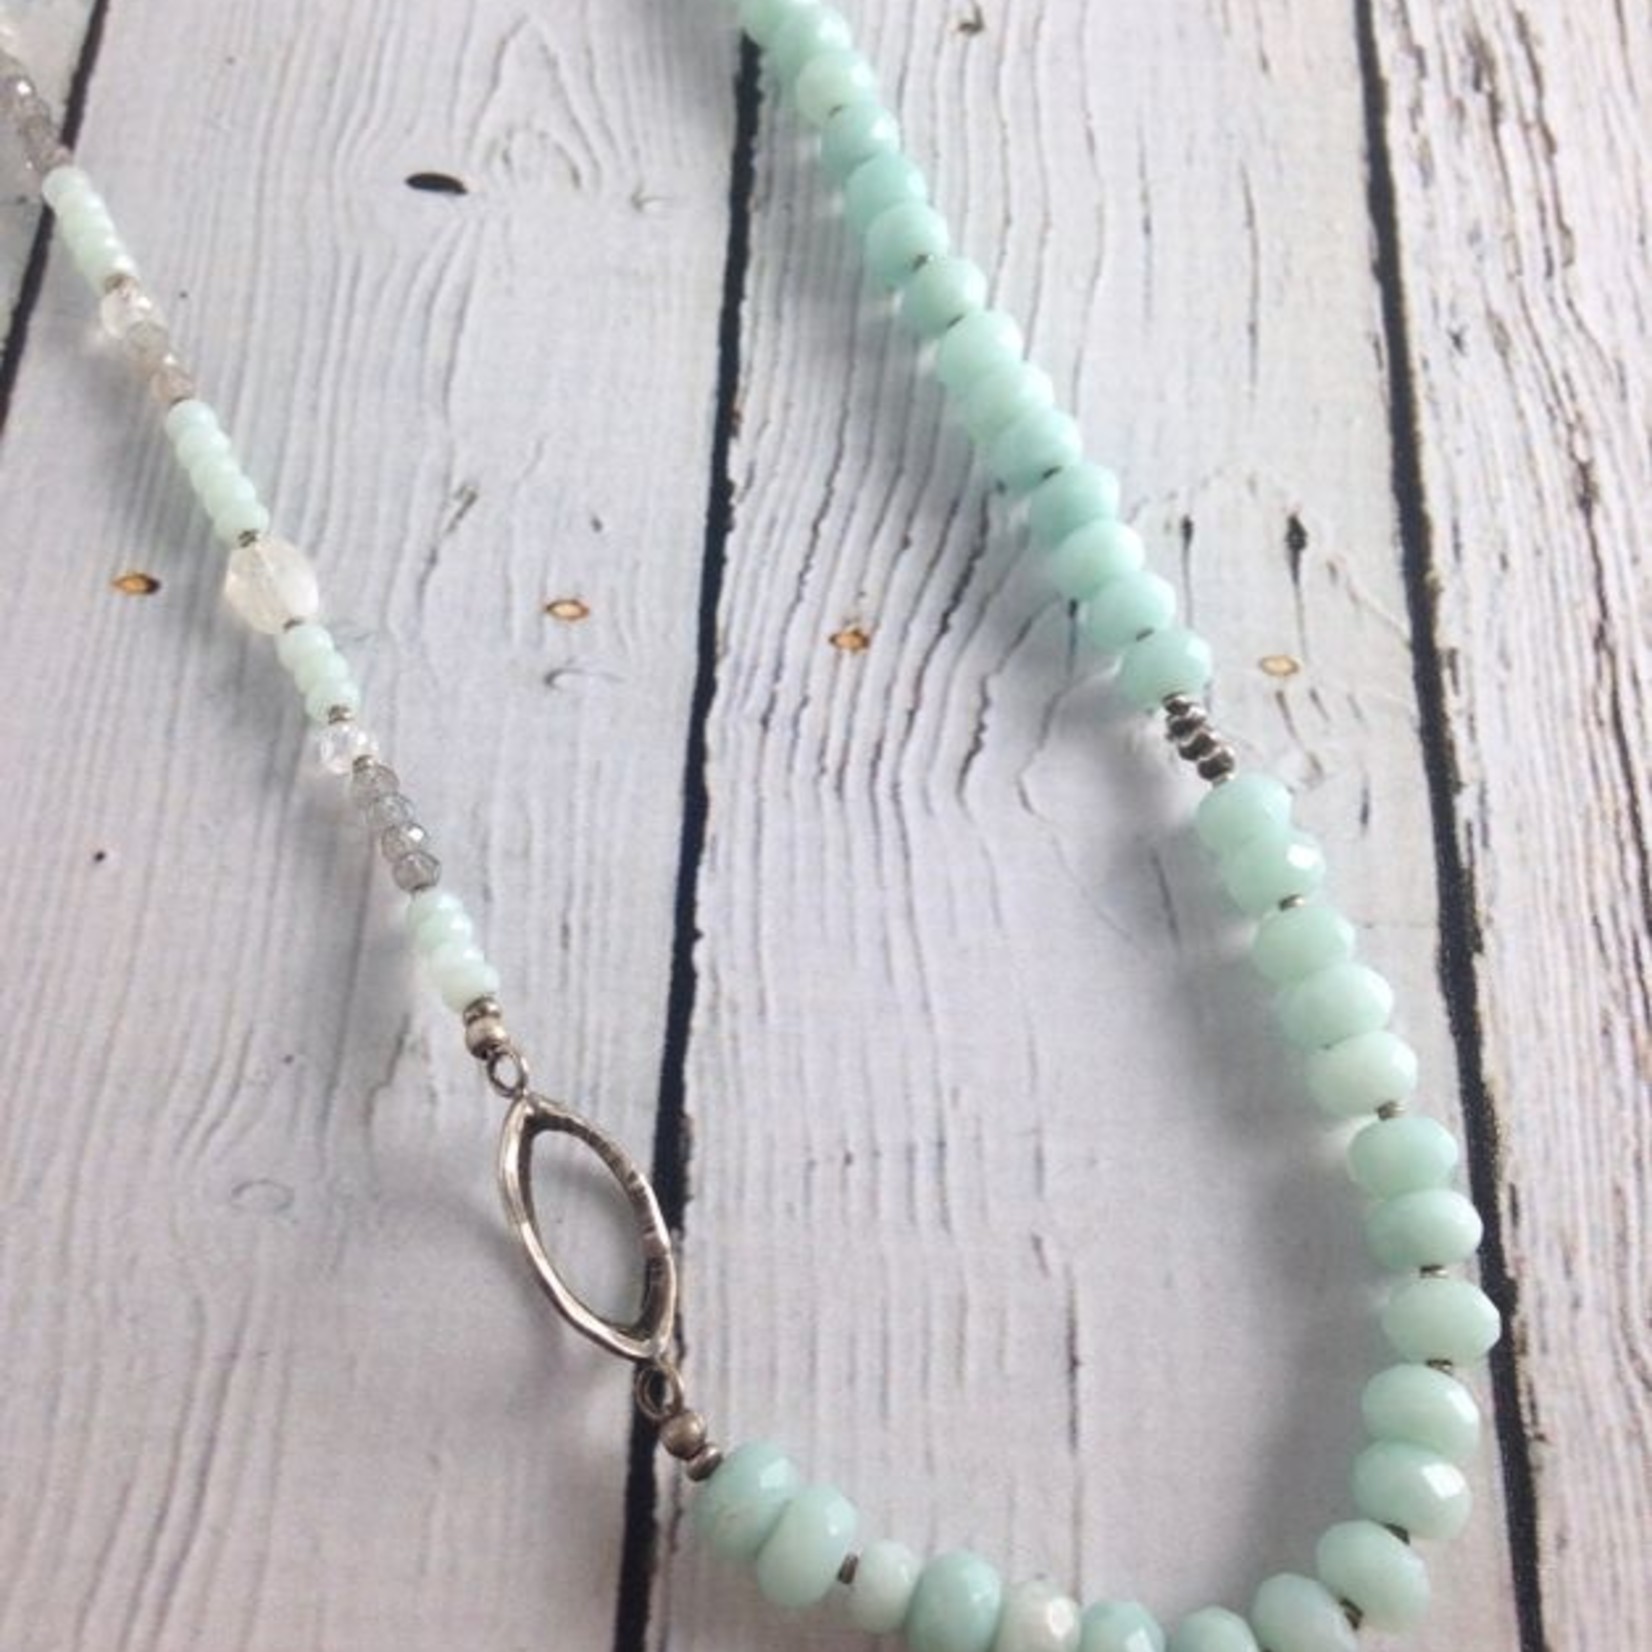 Handmade Sterling Silver, Faceted Amazonite, Labradorite and Moonstone Necklace, 20”